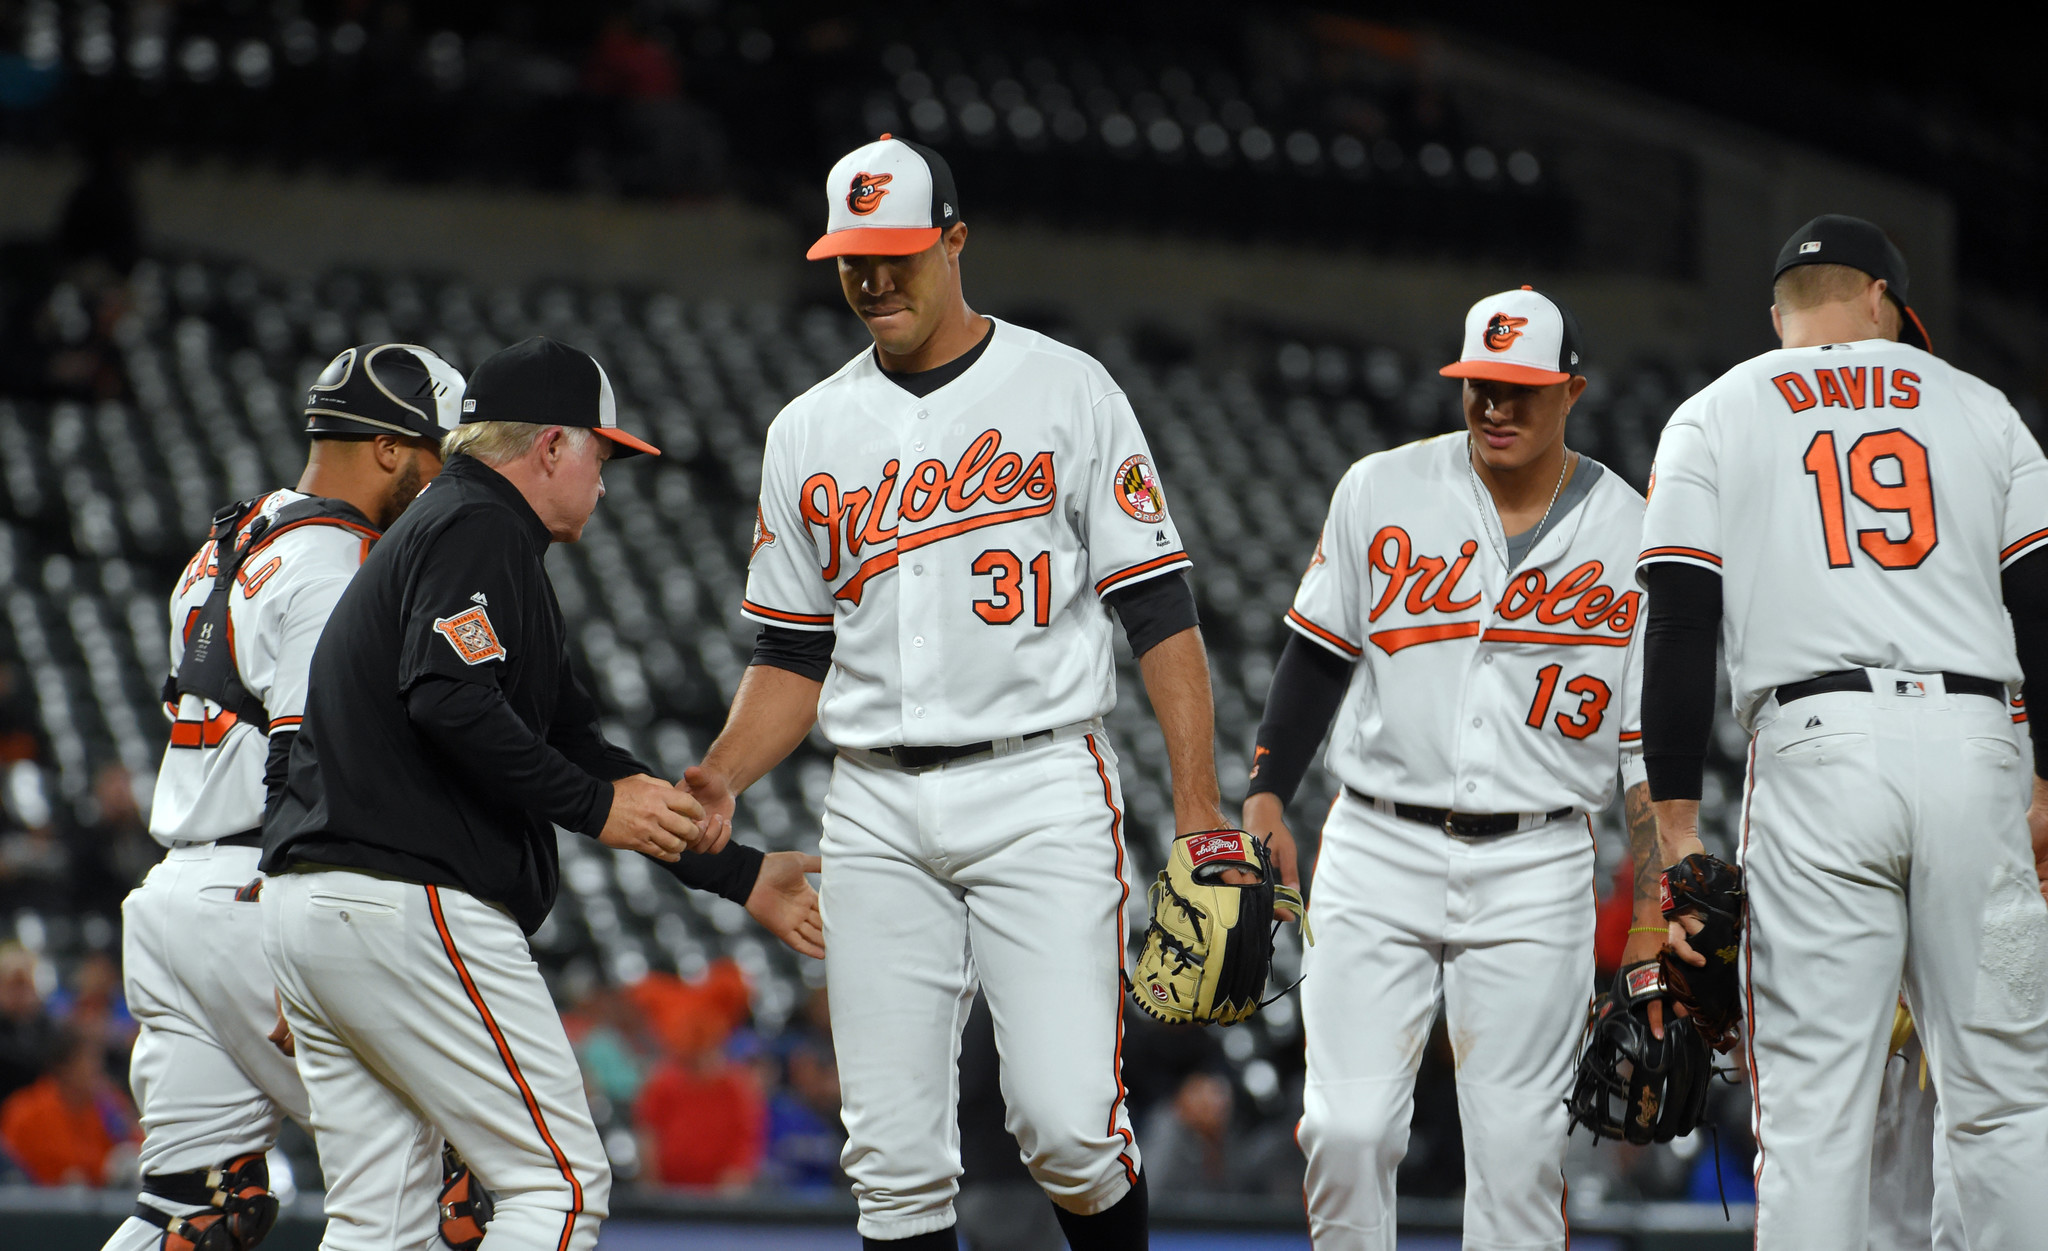 Consistently inconsistent, Orioles' Jimenez lasts just 3 1/3 innings after strong performance his previous start